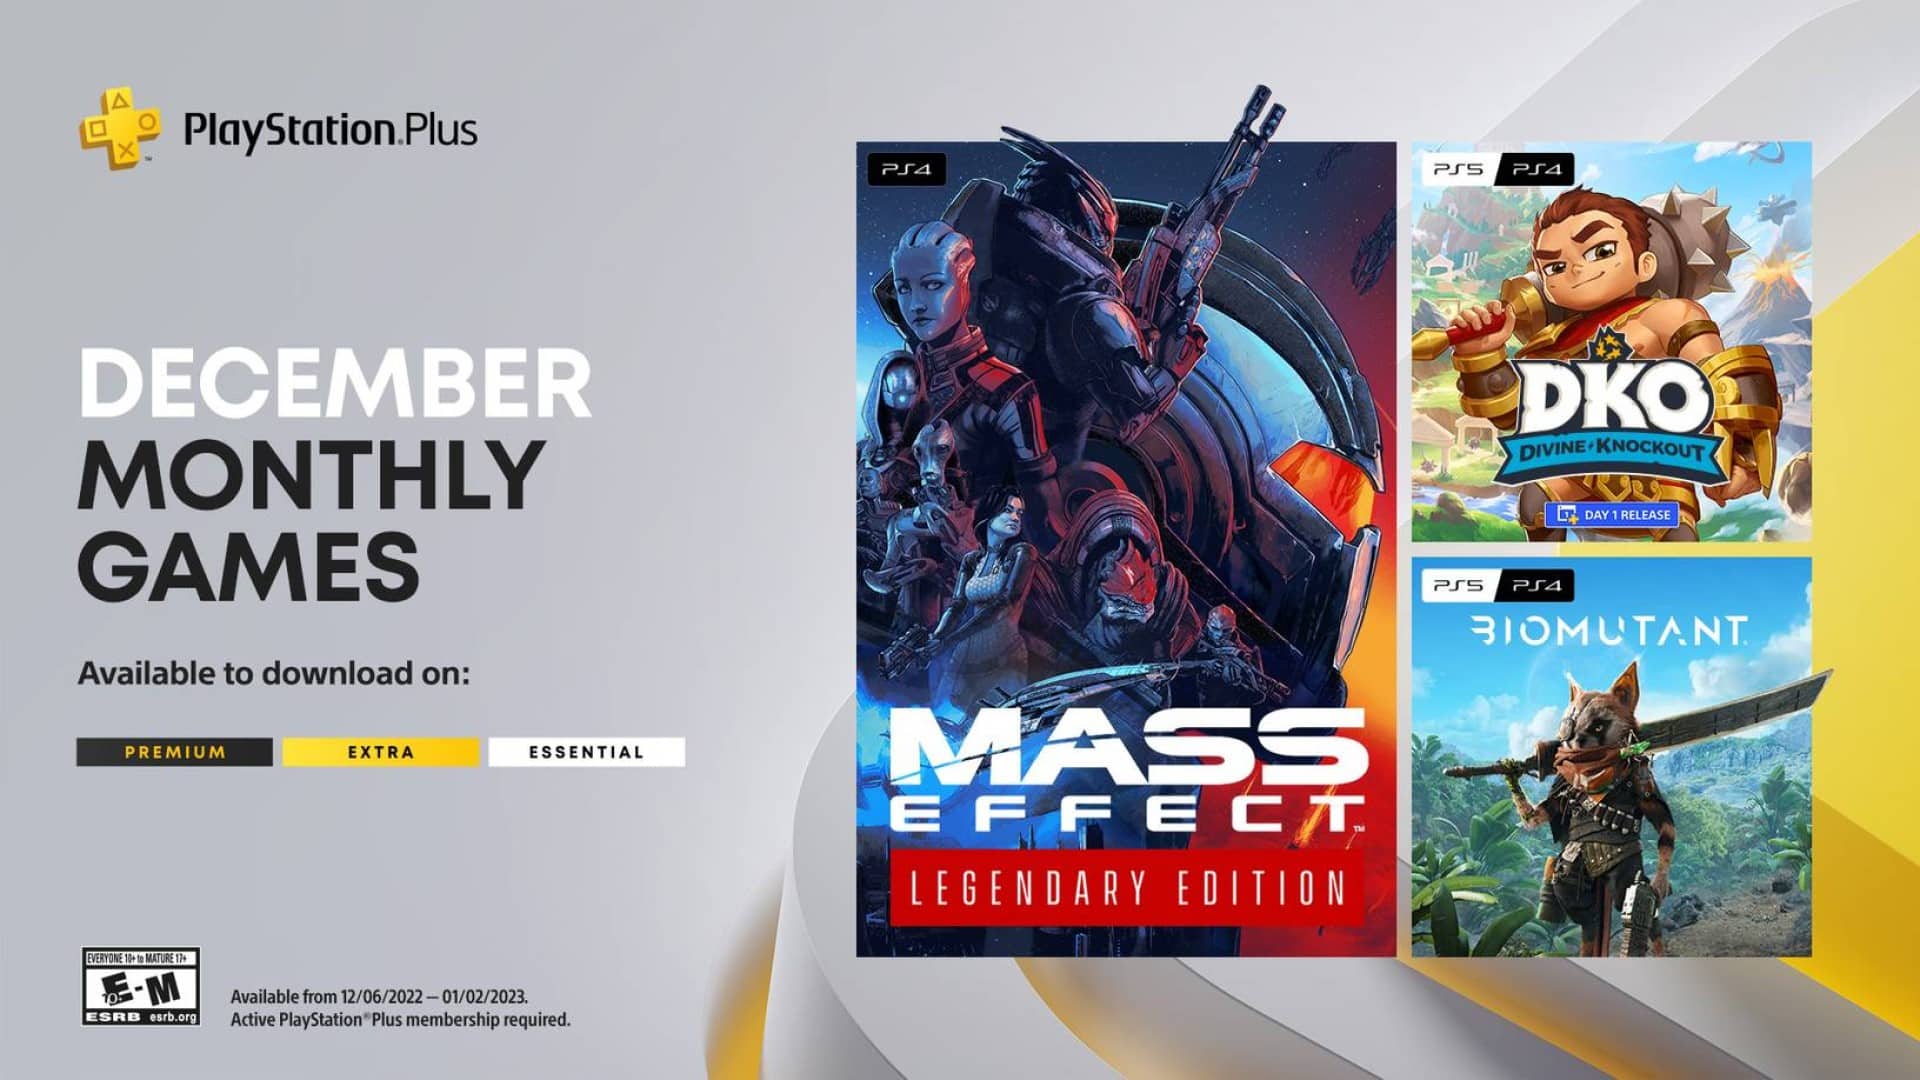 Mass Effect: Legendary Edition and Biomutant will be the games for PS Plus Essential in December